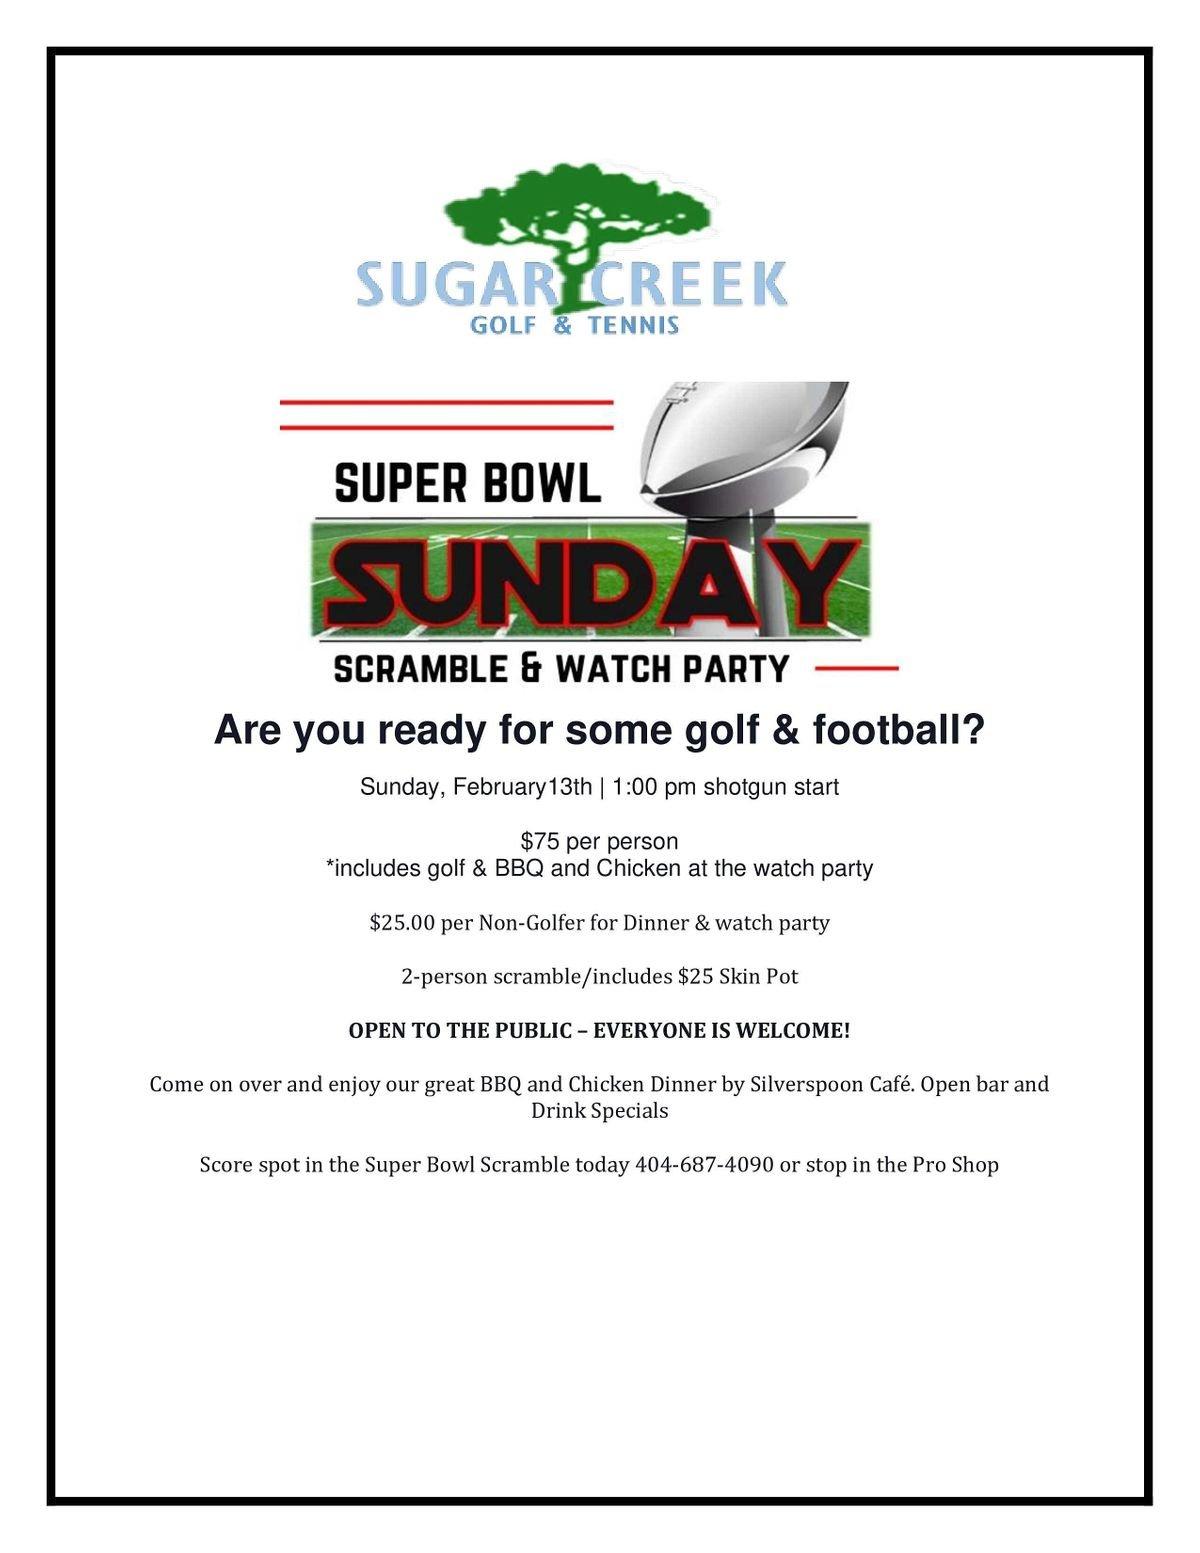 Super Bowl Sunday Golf Scramble and Watch Party